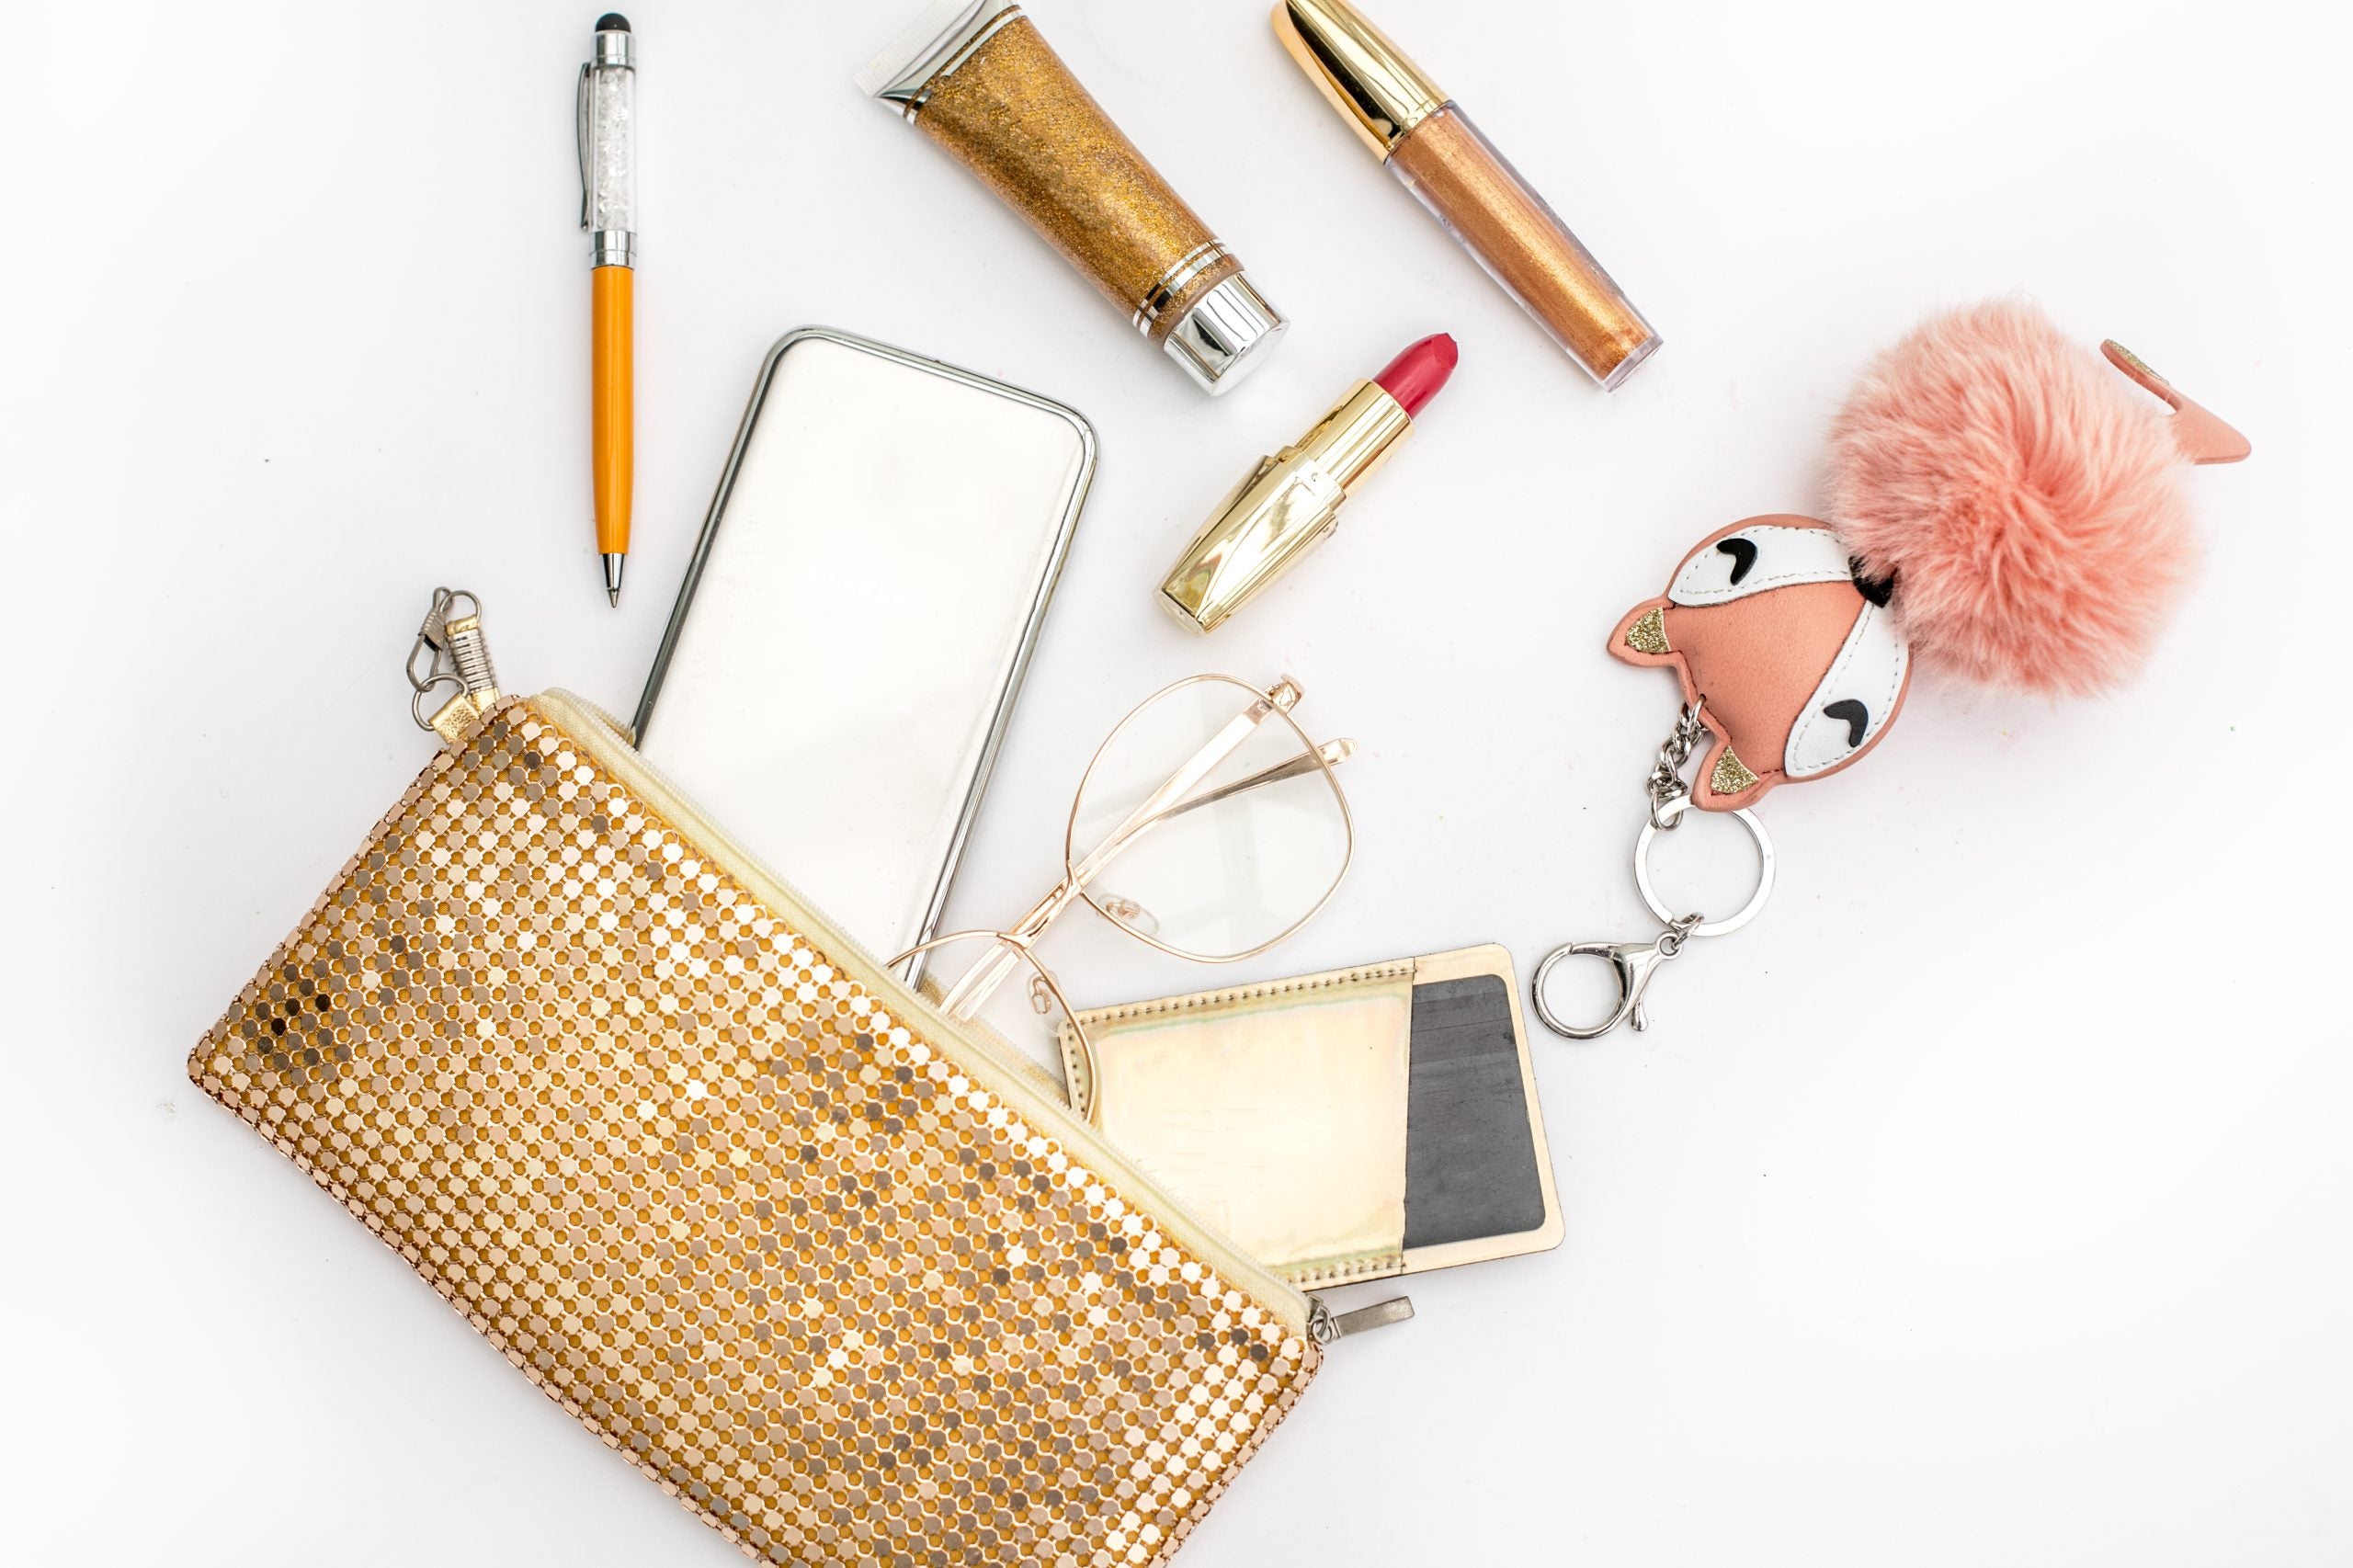 10 Beauty Items That Should Stay In Your Purse At All Times